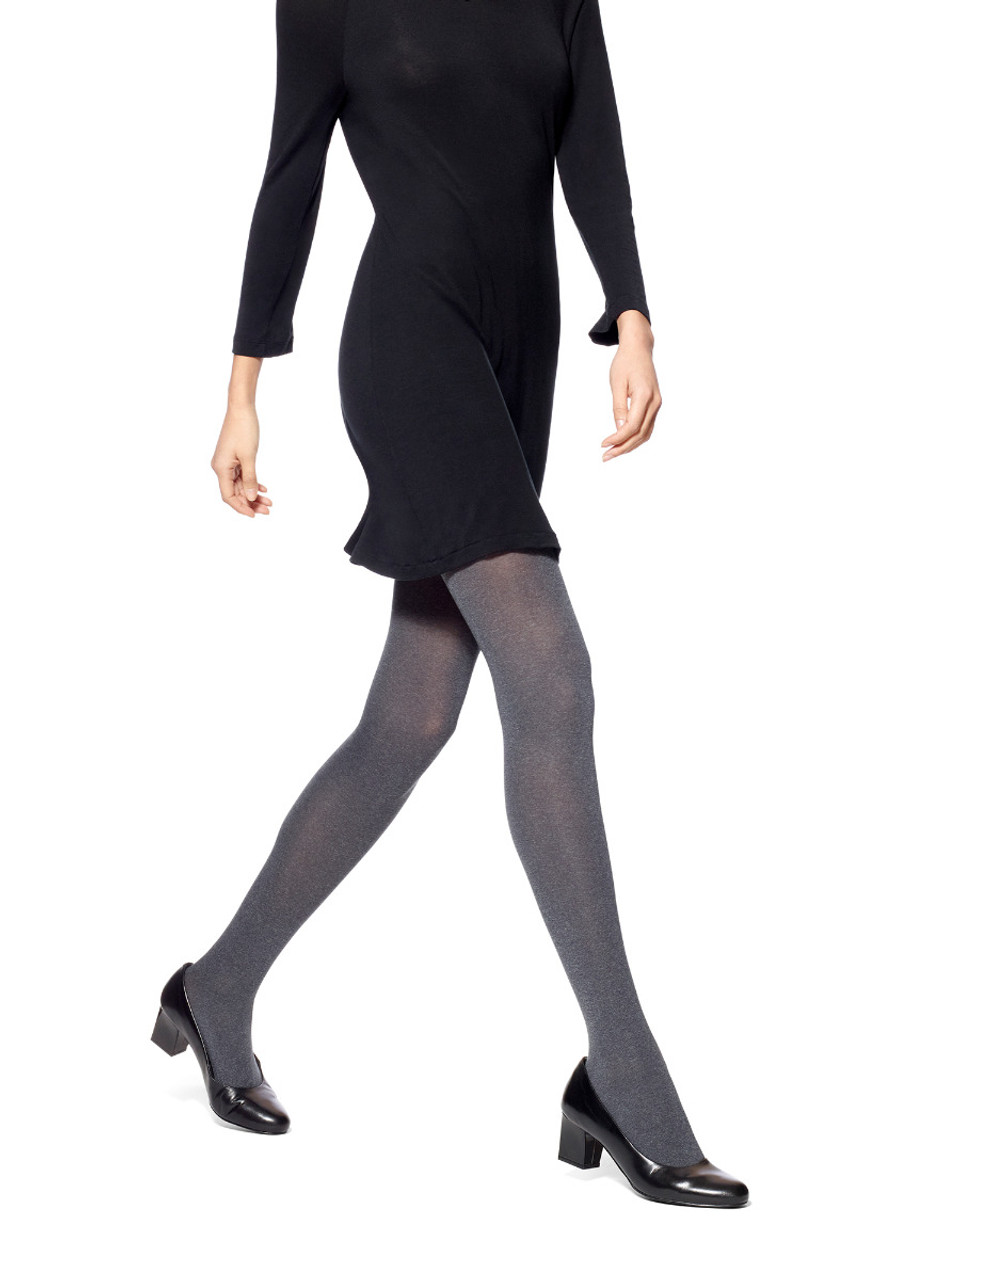 Super Opaque Smooth Control Tights - Firecracker - Set Me Free